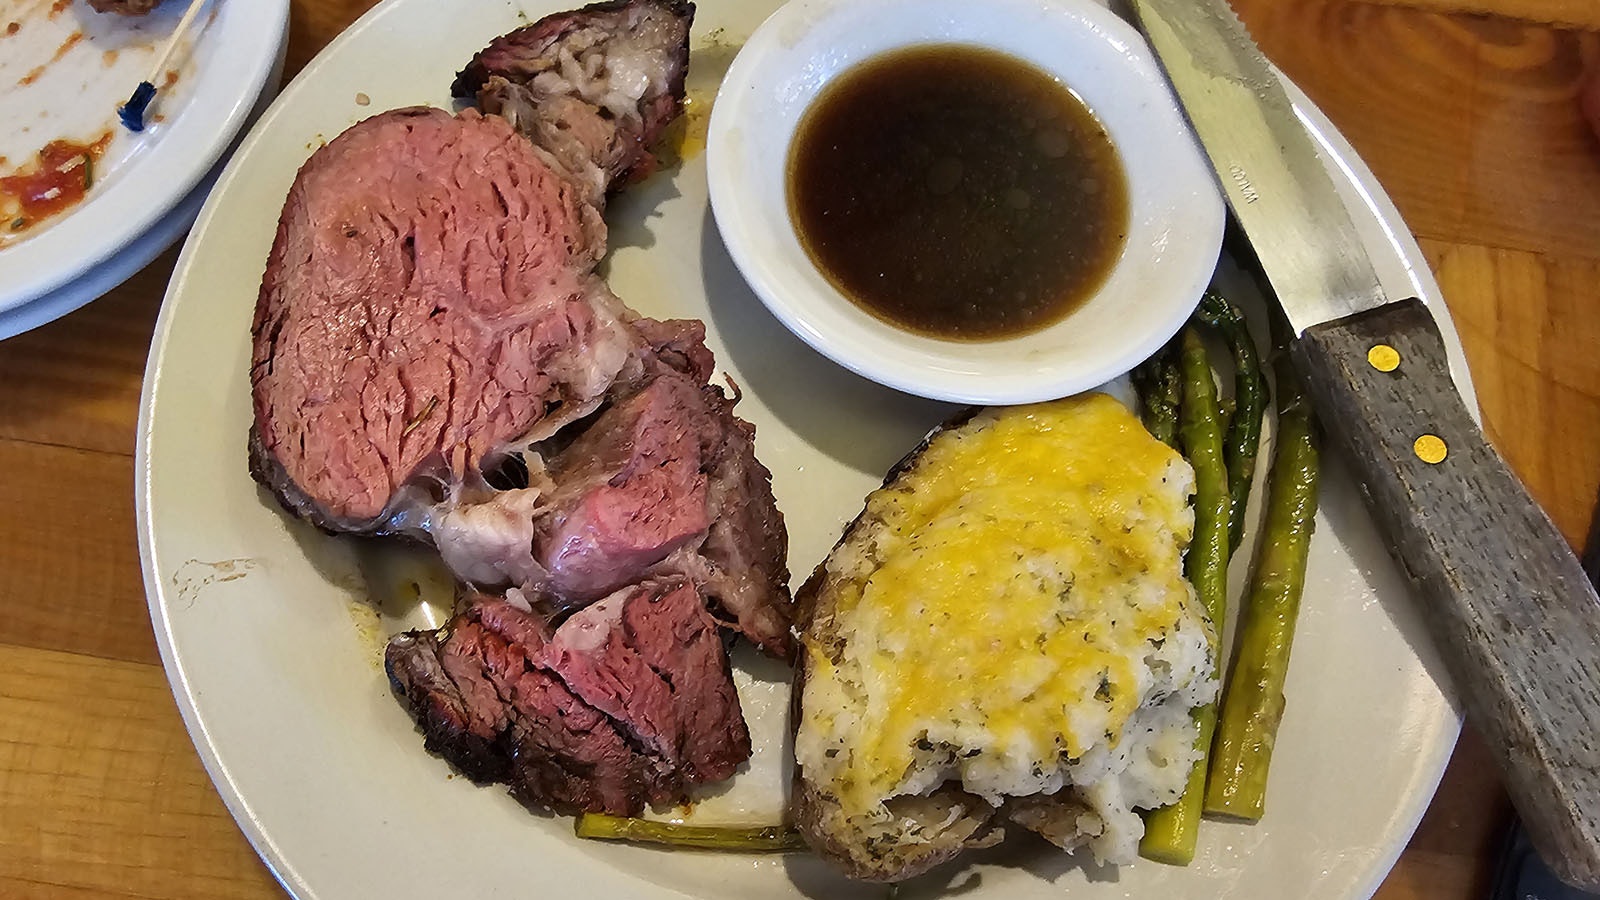 Smoked prime rib dinner with twice-baked potato and asparagus.